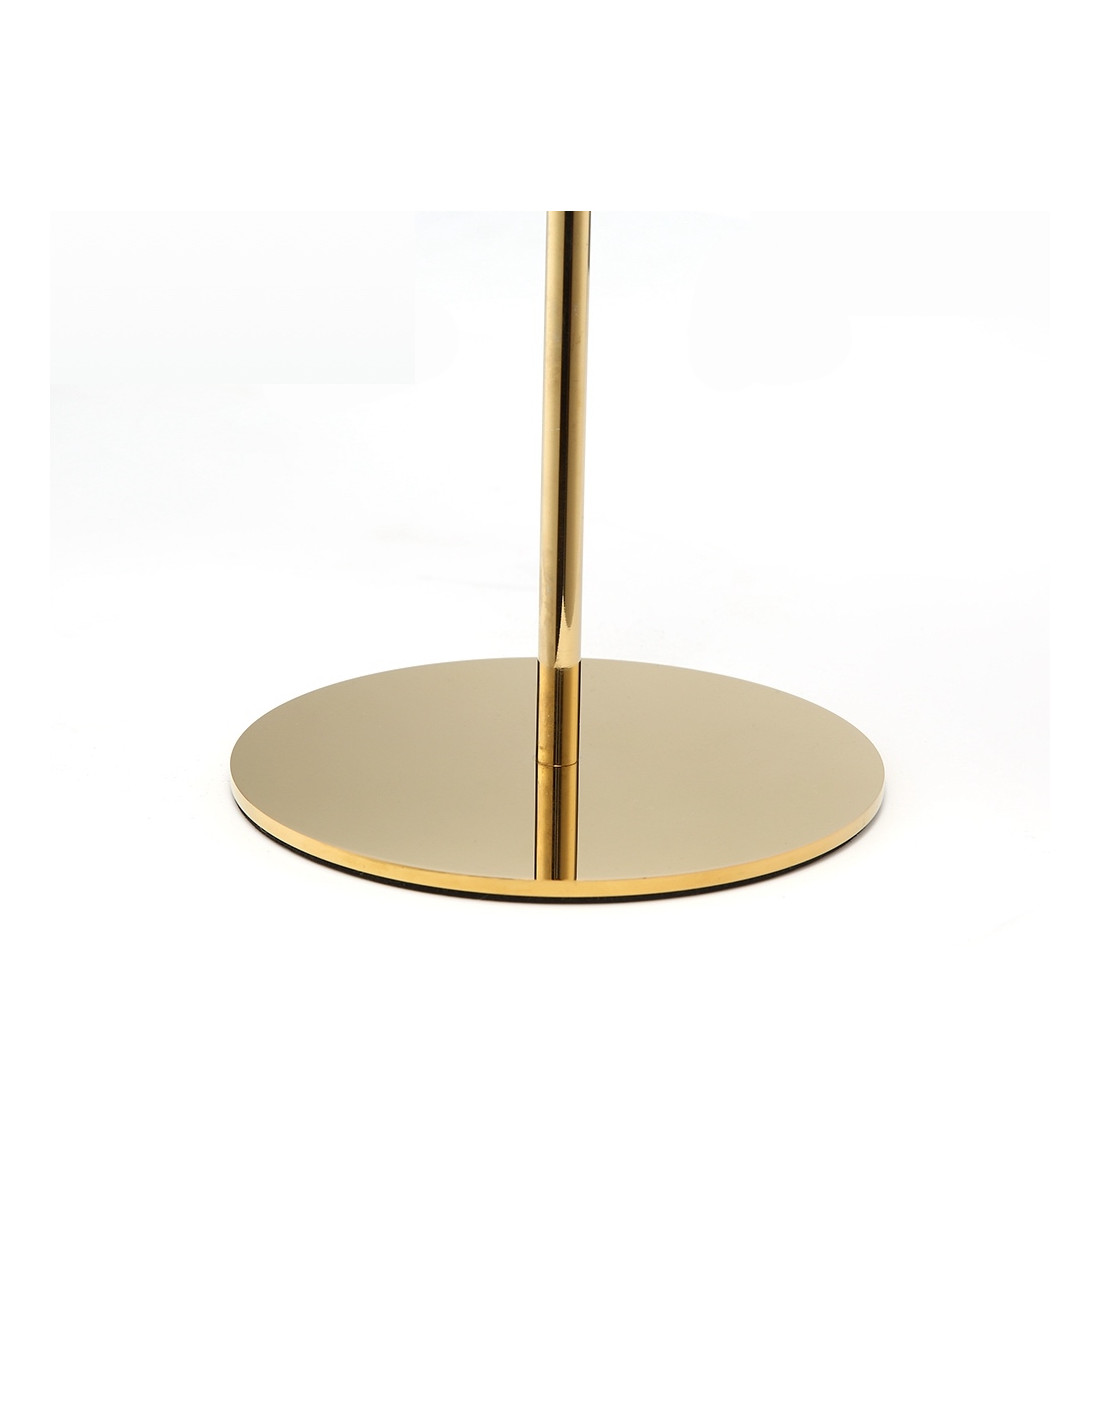 Luxury Golden Jewelry Display Stand - For Watch Bangle Bracelet